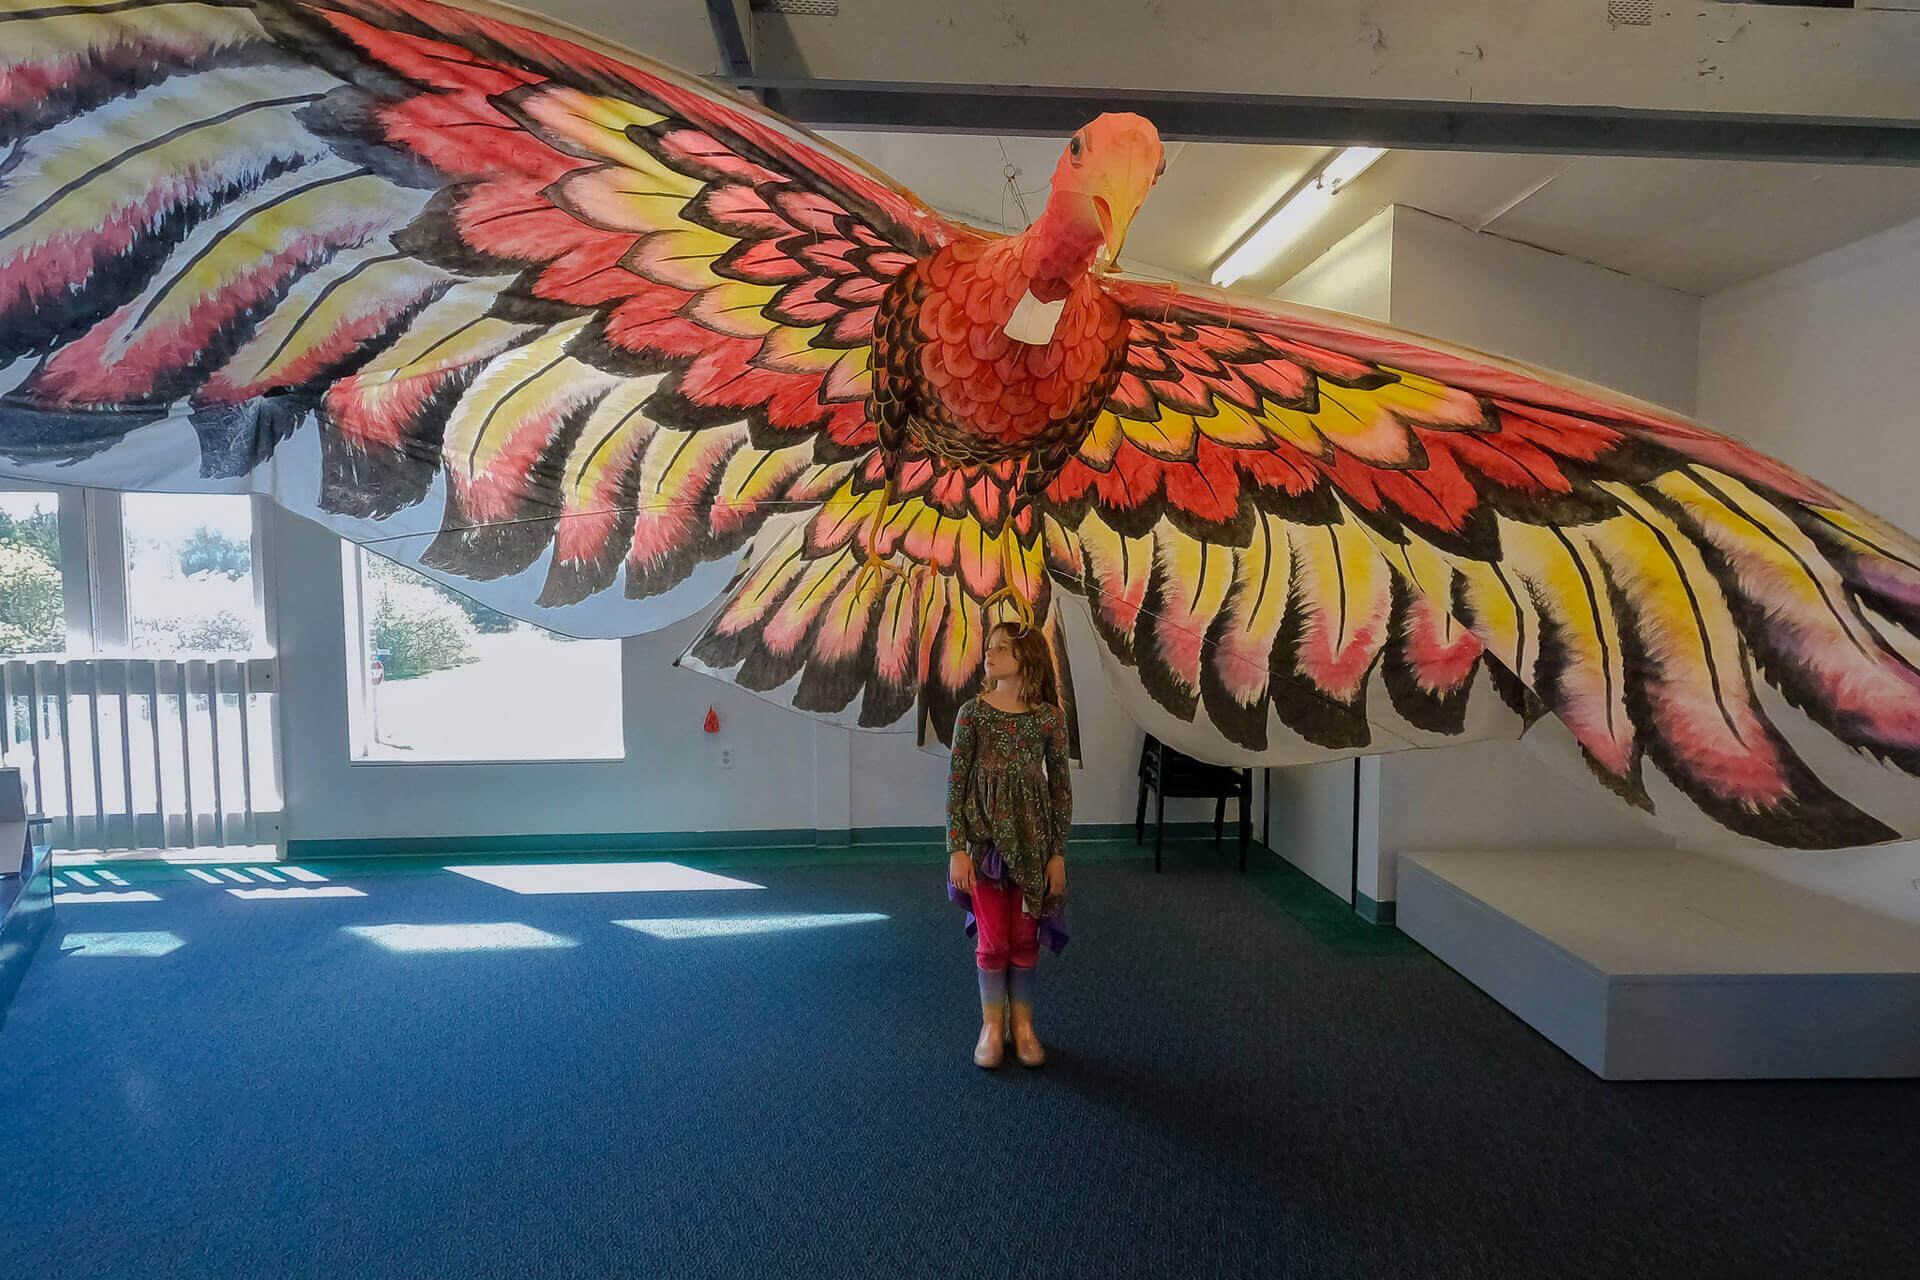 A young girl stands under a large kite shaped like a bird at a museum in Long Beach Washington